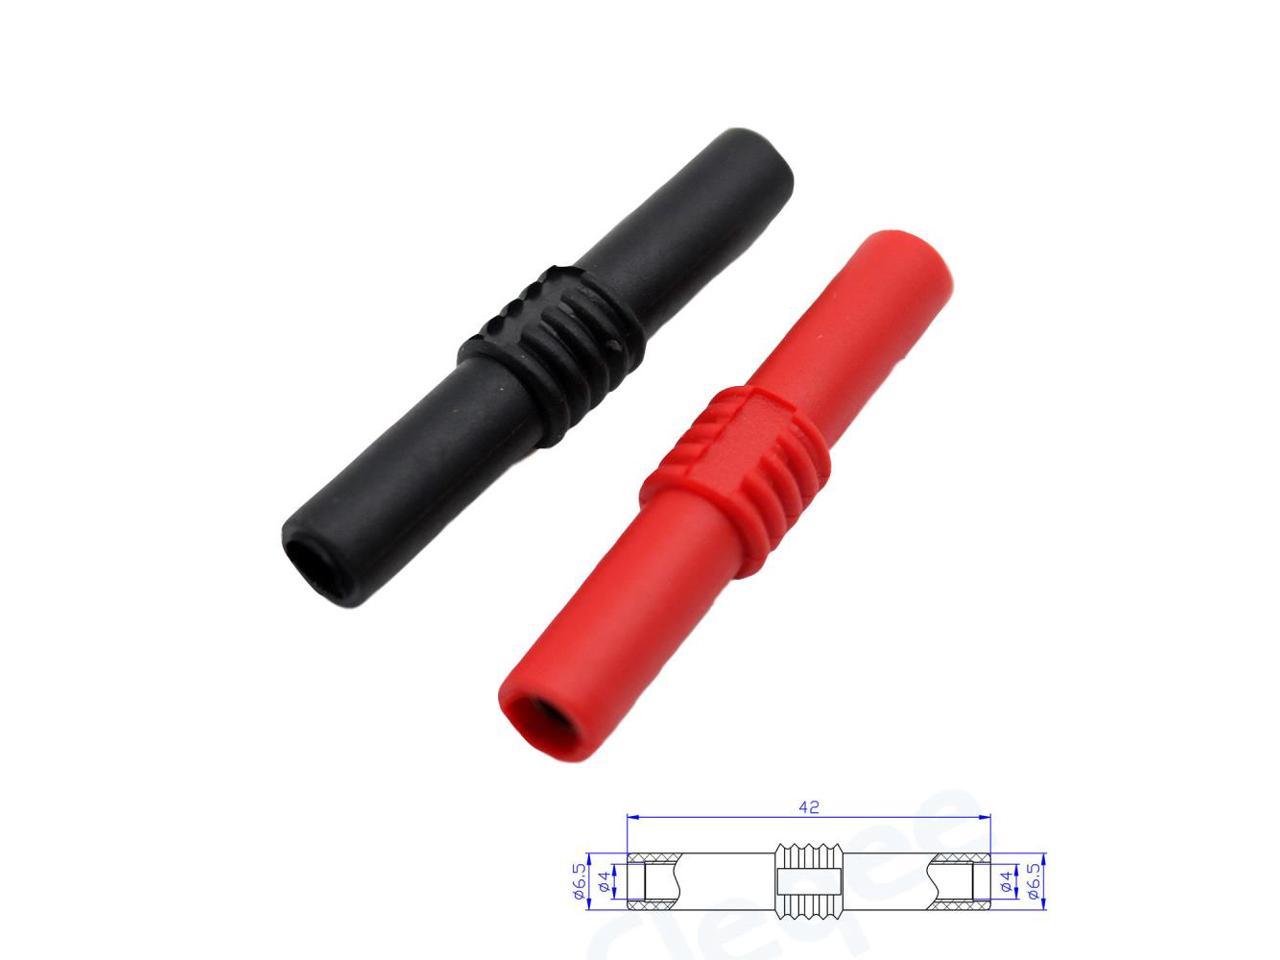 Details about   4PCS 4mm Insulated Female to Female Banana Jack Coupler Adapter Connector 